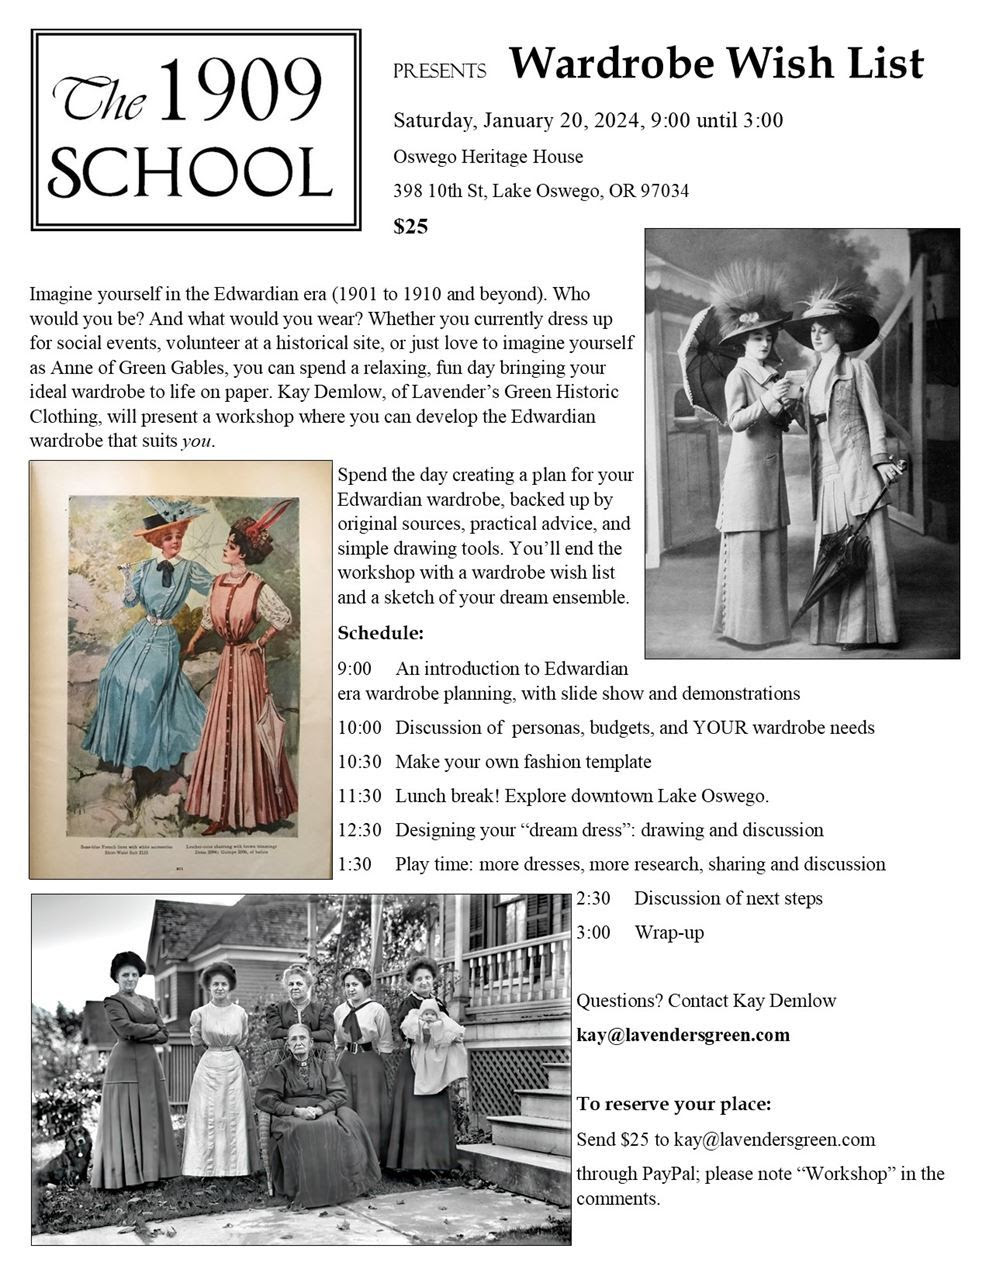 The 1909 School presents Wardrobe Wish List. Event flyer for Kay Demlow's event with the Heritage House